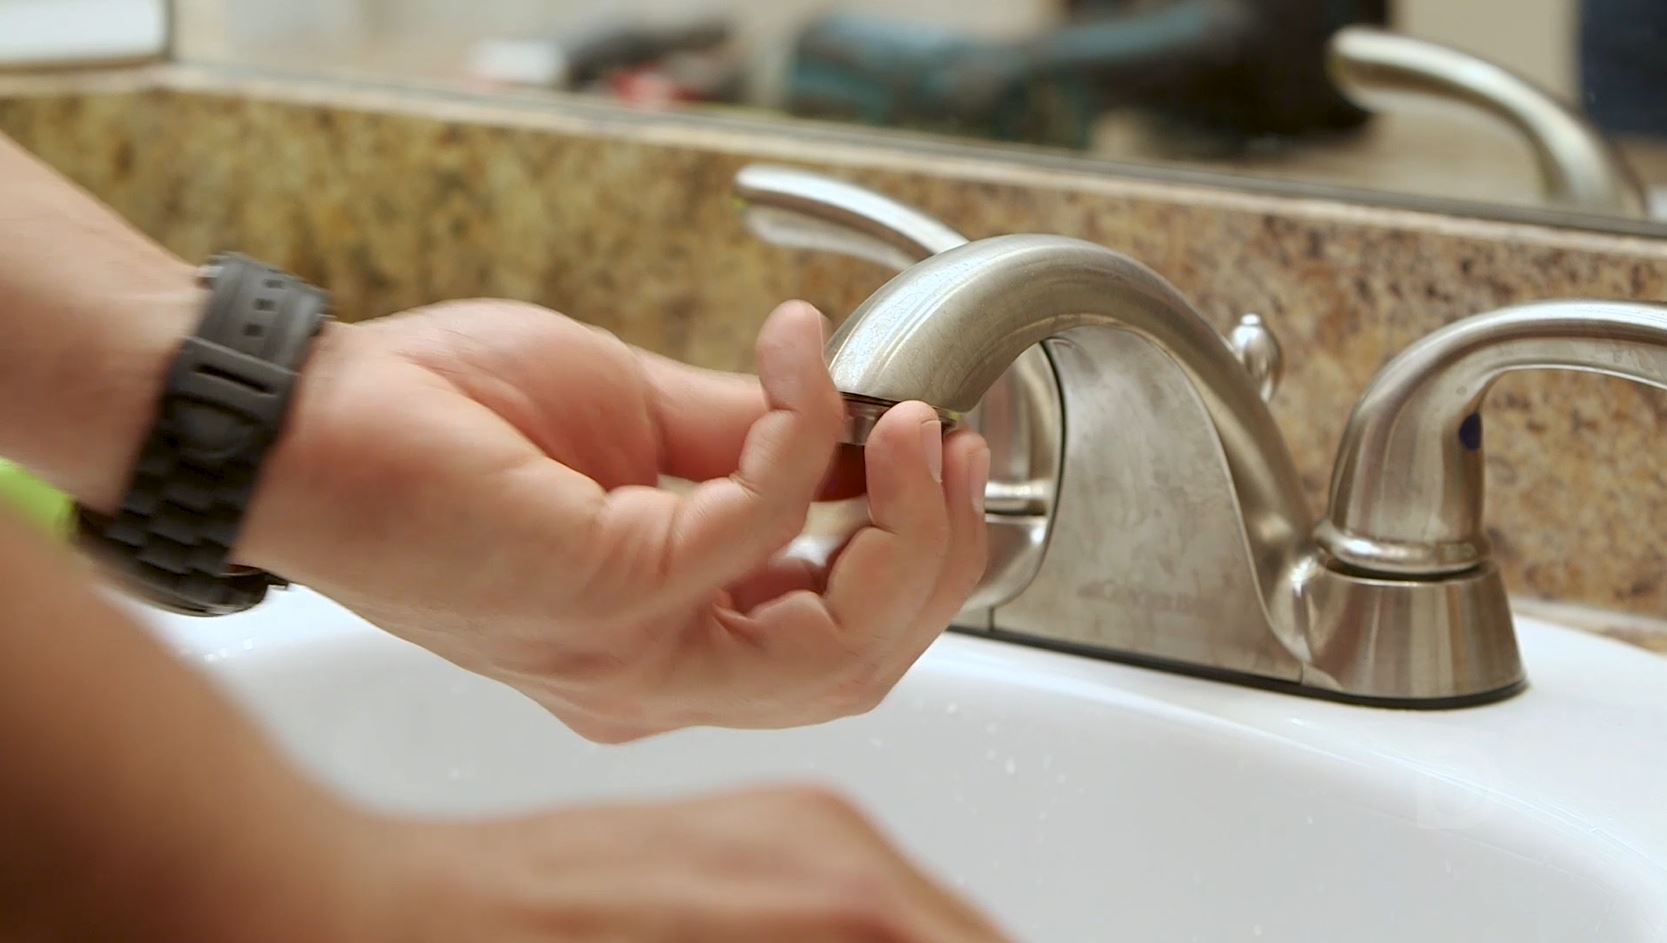 Replacing faucet aerators is an easy way to save water at home. Photo credit: Denver Water.